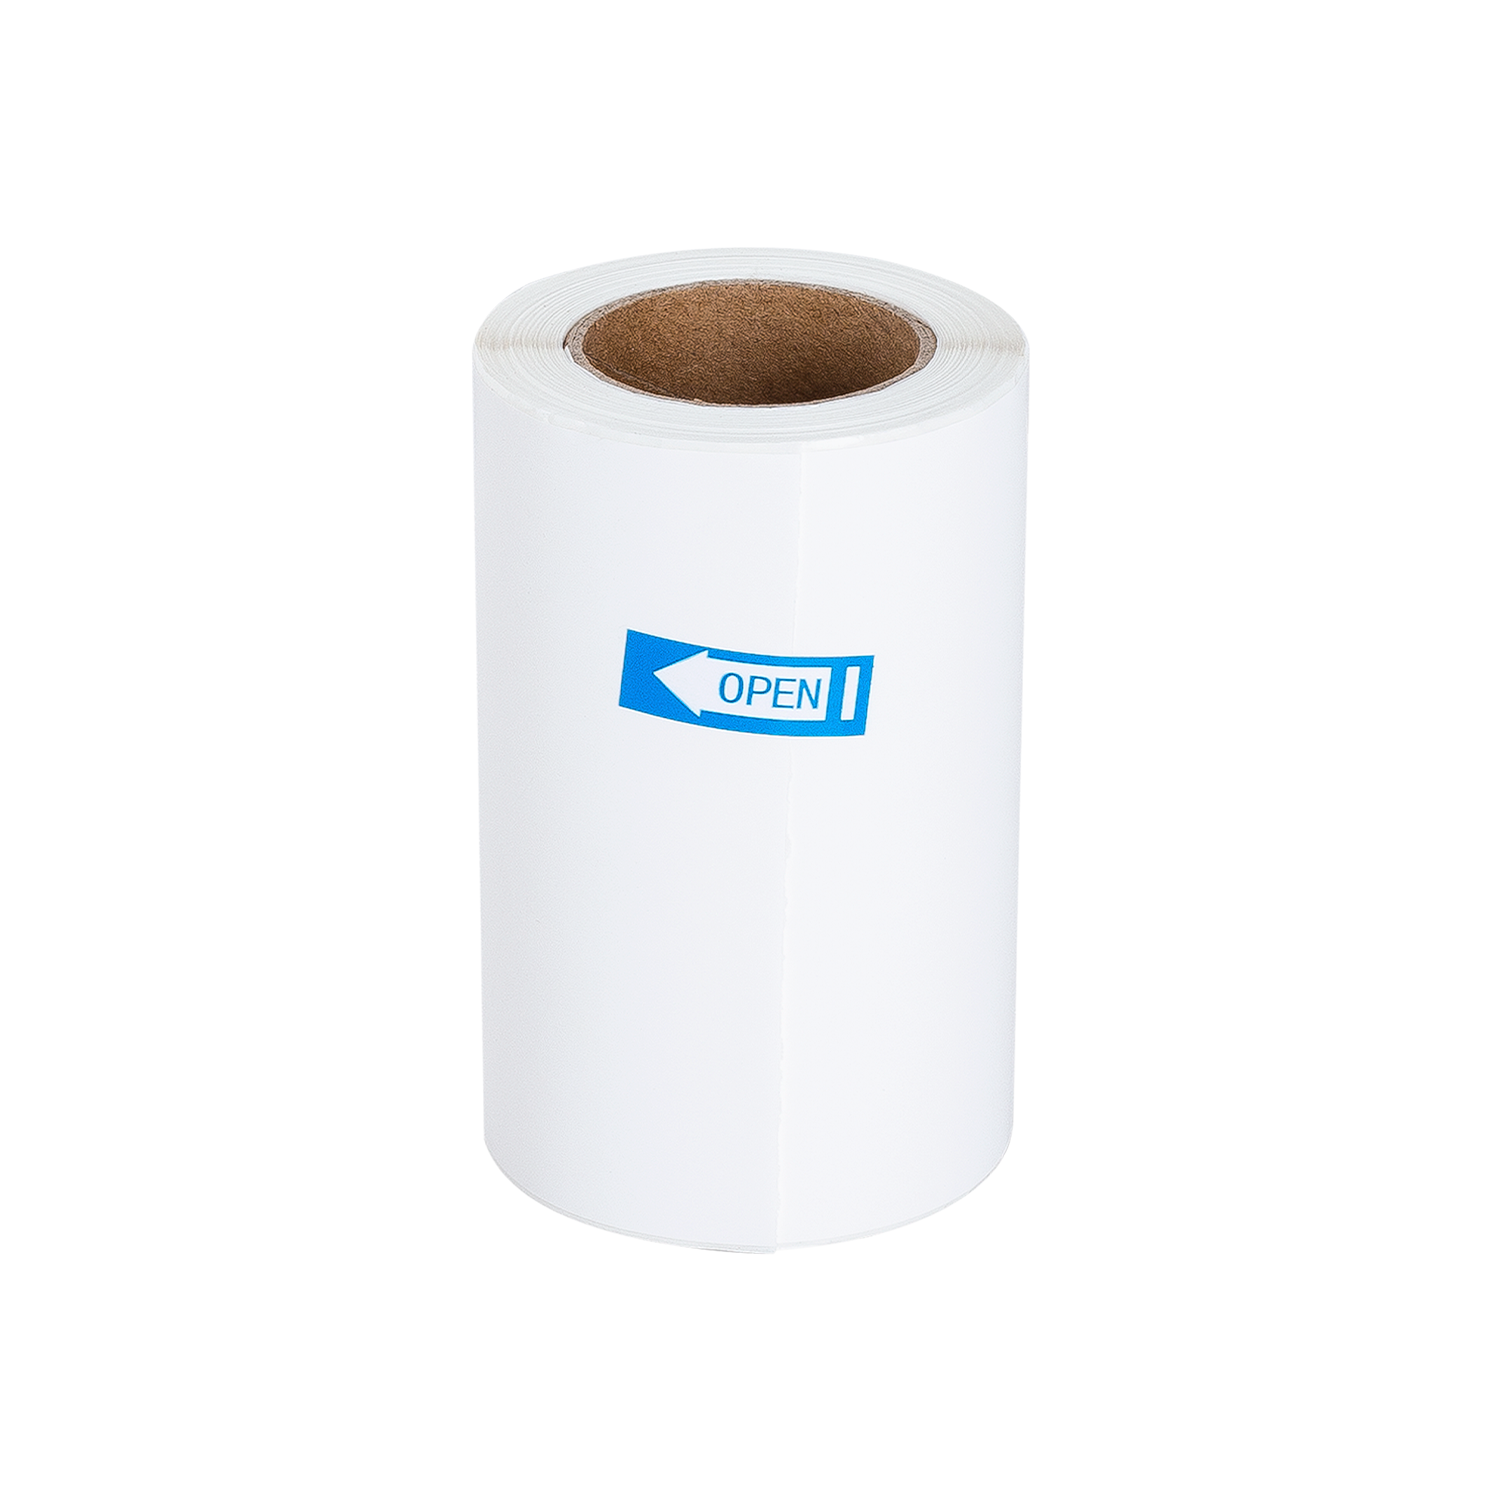 Generic 4X6" Direct Thermal Shipping Label - Case of 36 Rolls